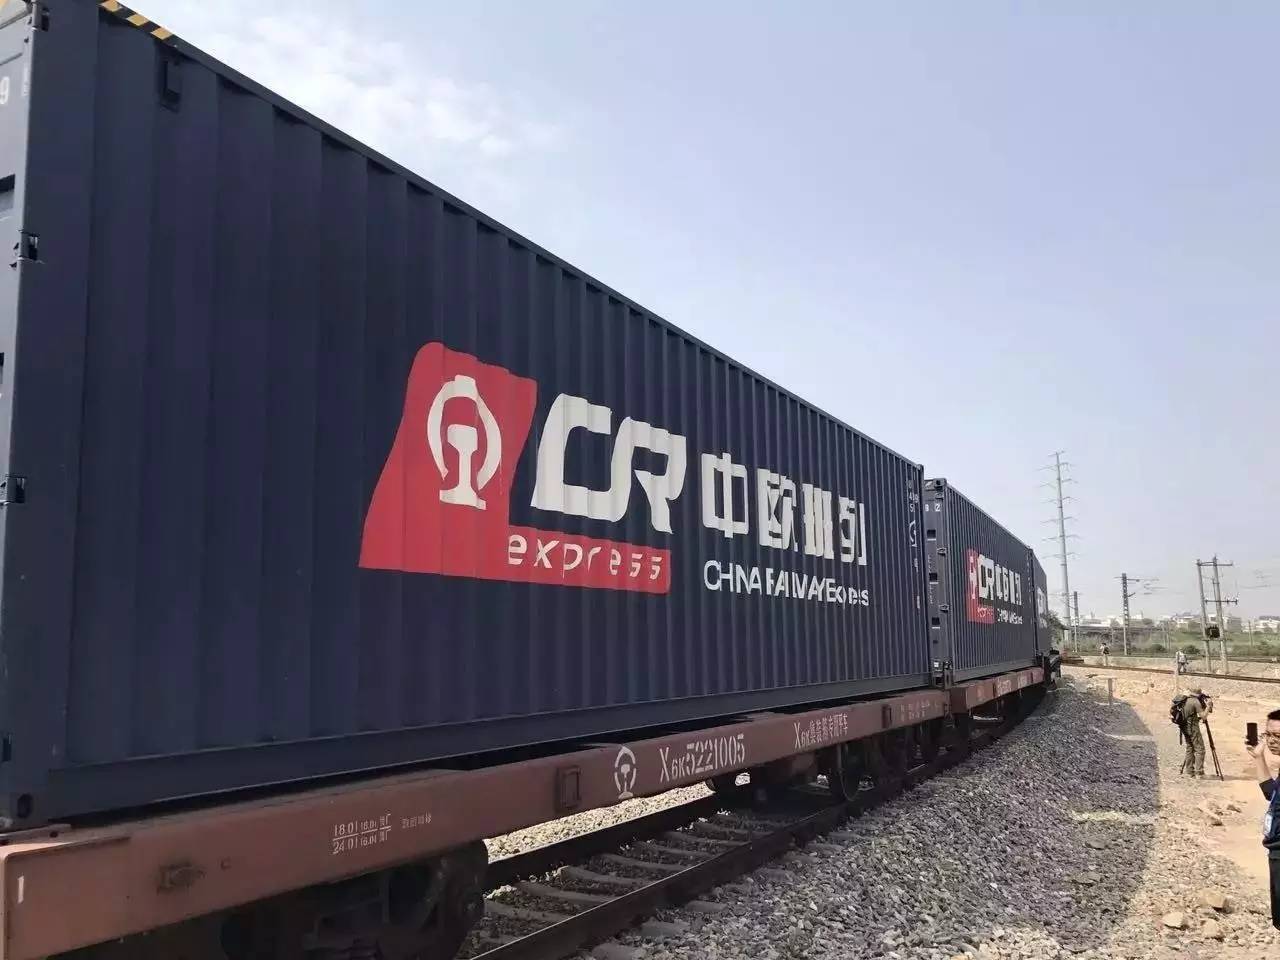 General cargo transportation from Zhongshan, China to Hamburg, Germany, six full containers